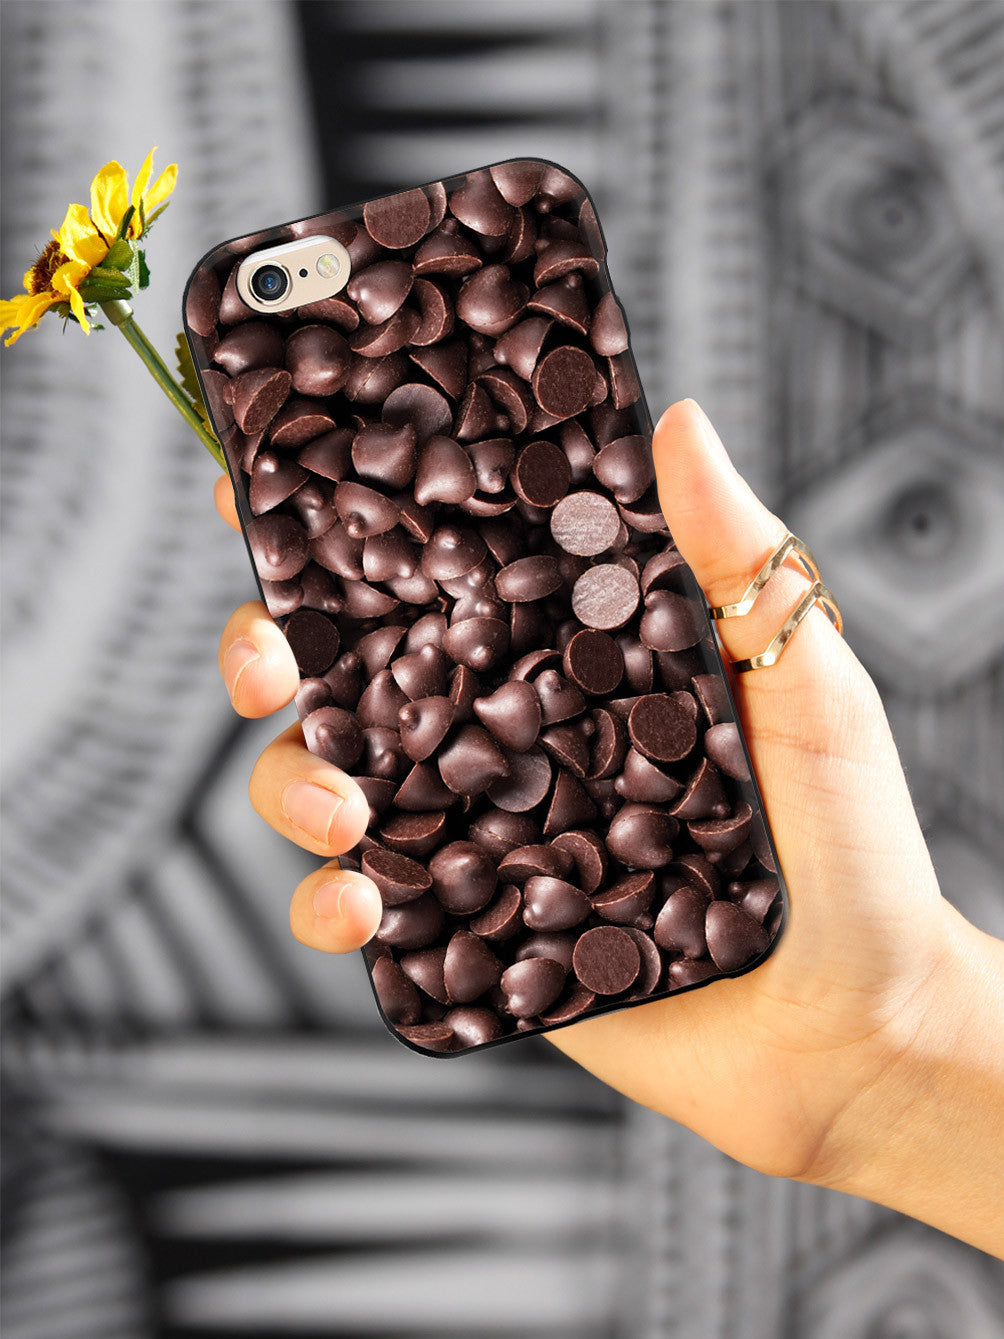 Chocolate Chips Case